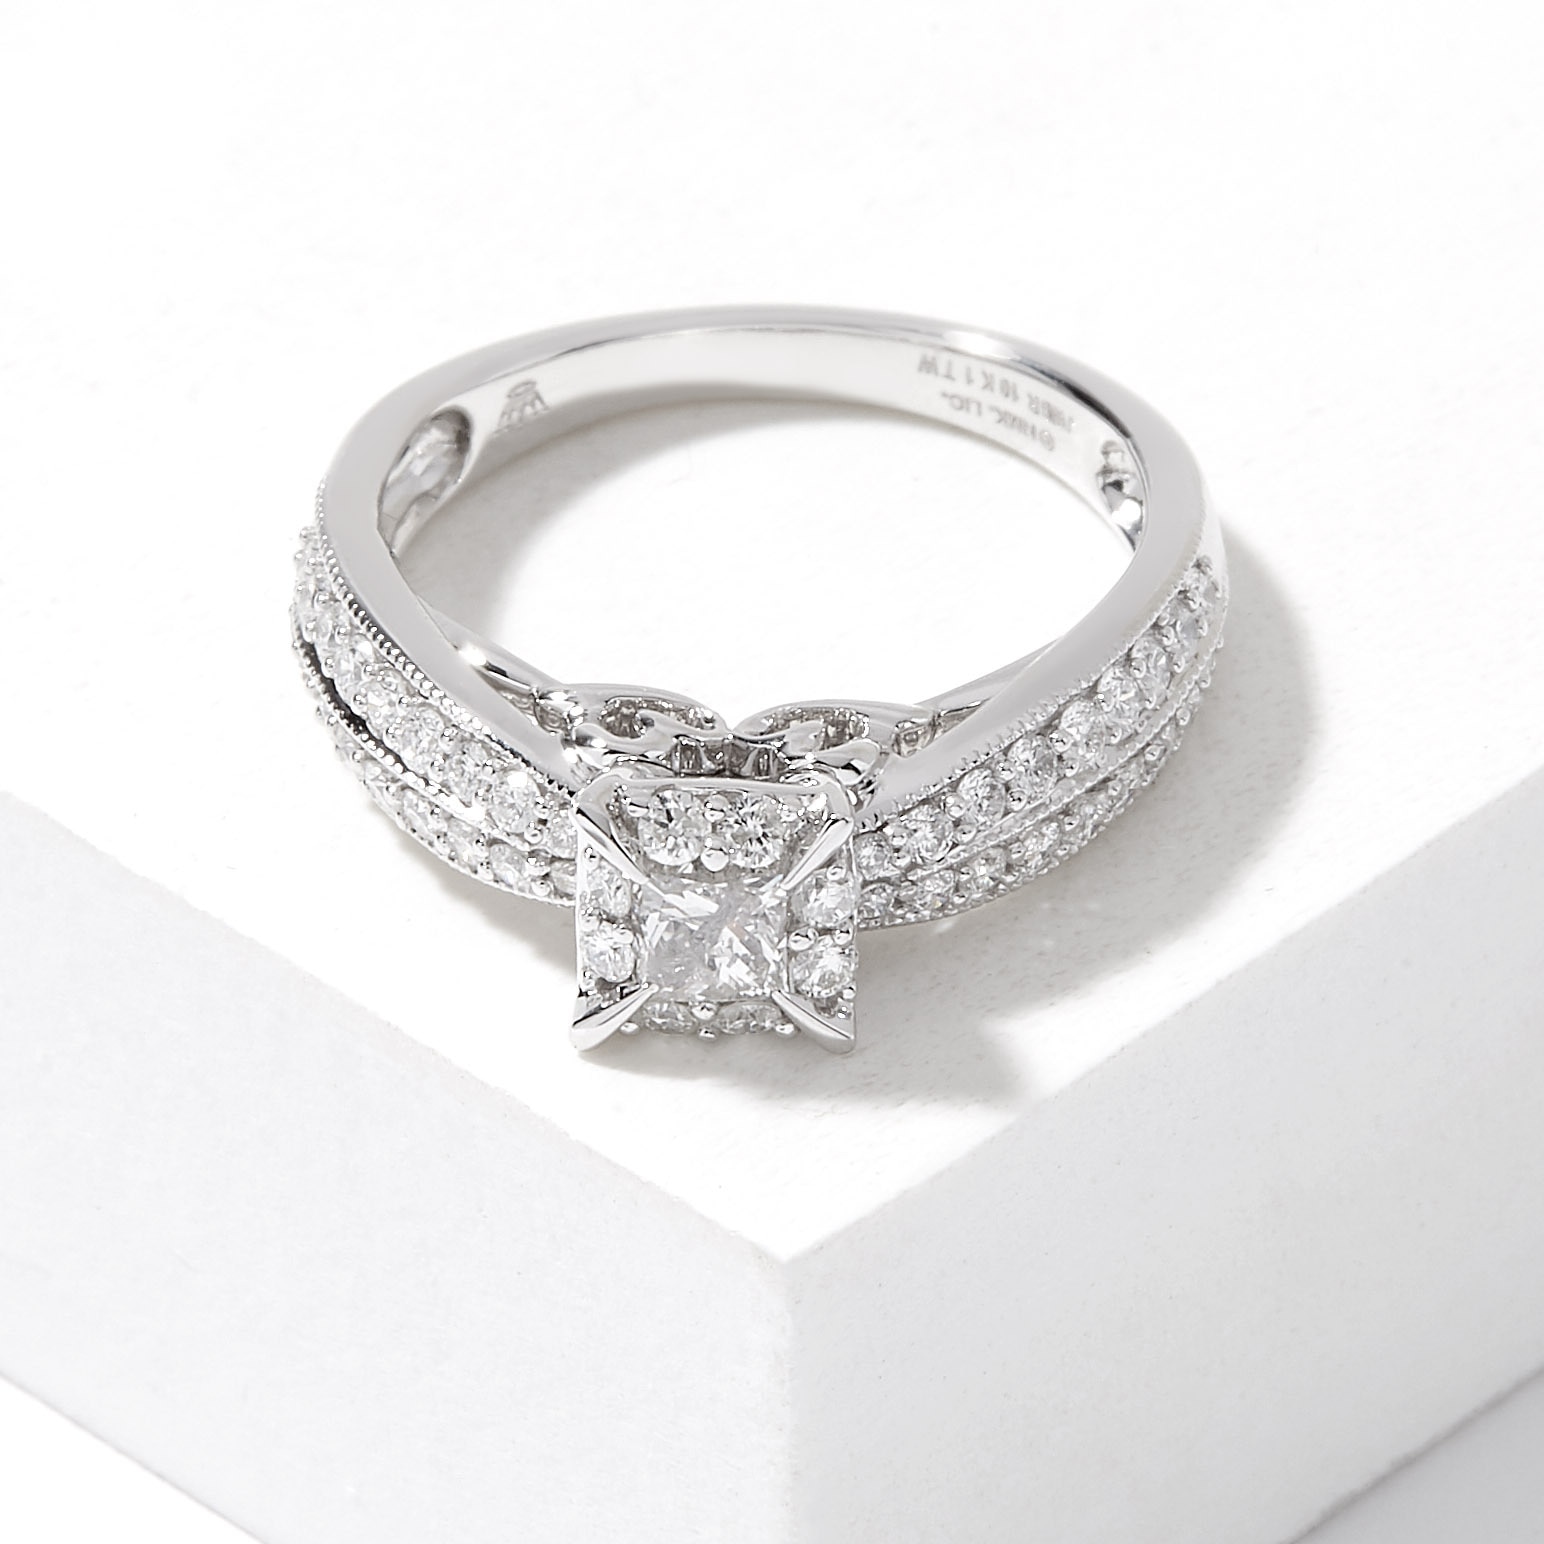 Jewellery - Rings - Engagement Rings & Wedding Bands - Engagement